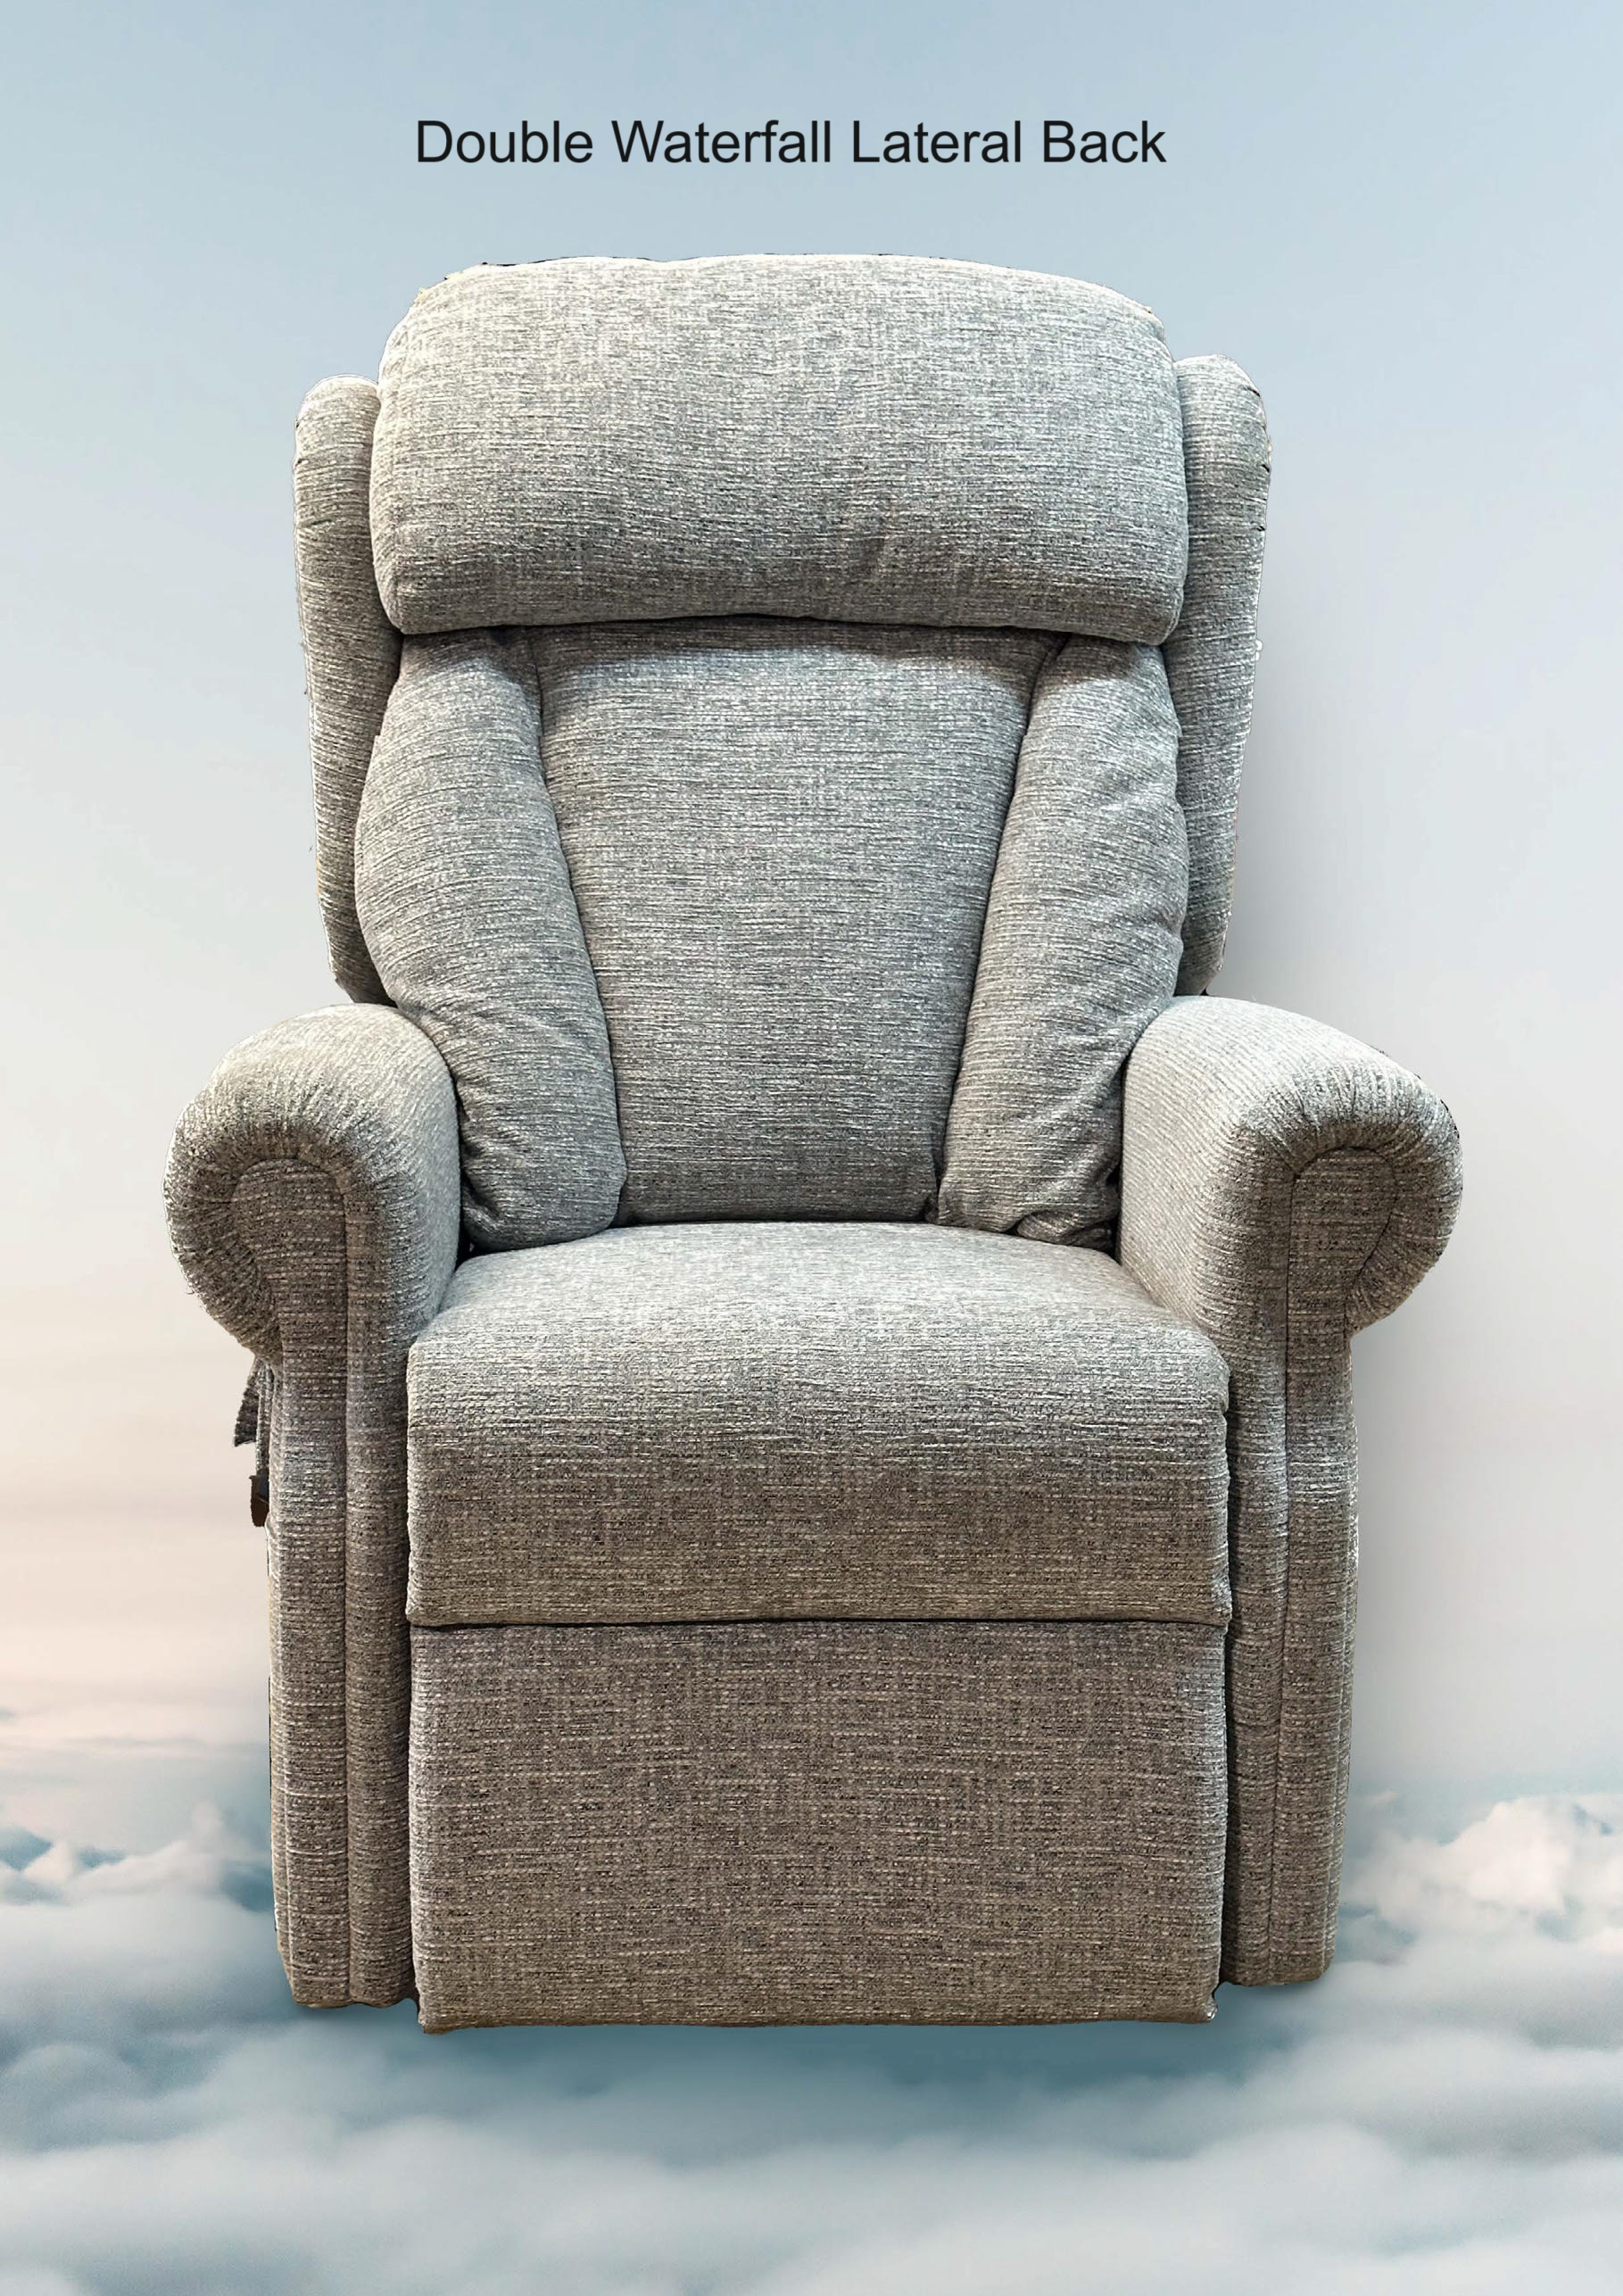 Primacare Brecon Dual Motor Tilt in Space Riser Recline Chair with Double Lateral Waterfall Back